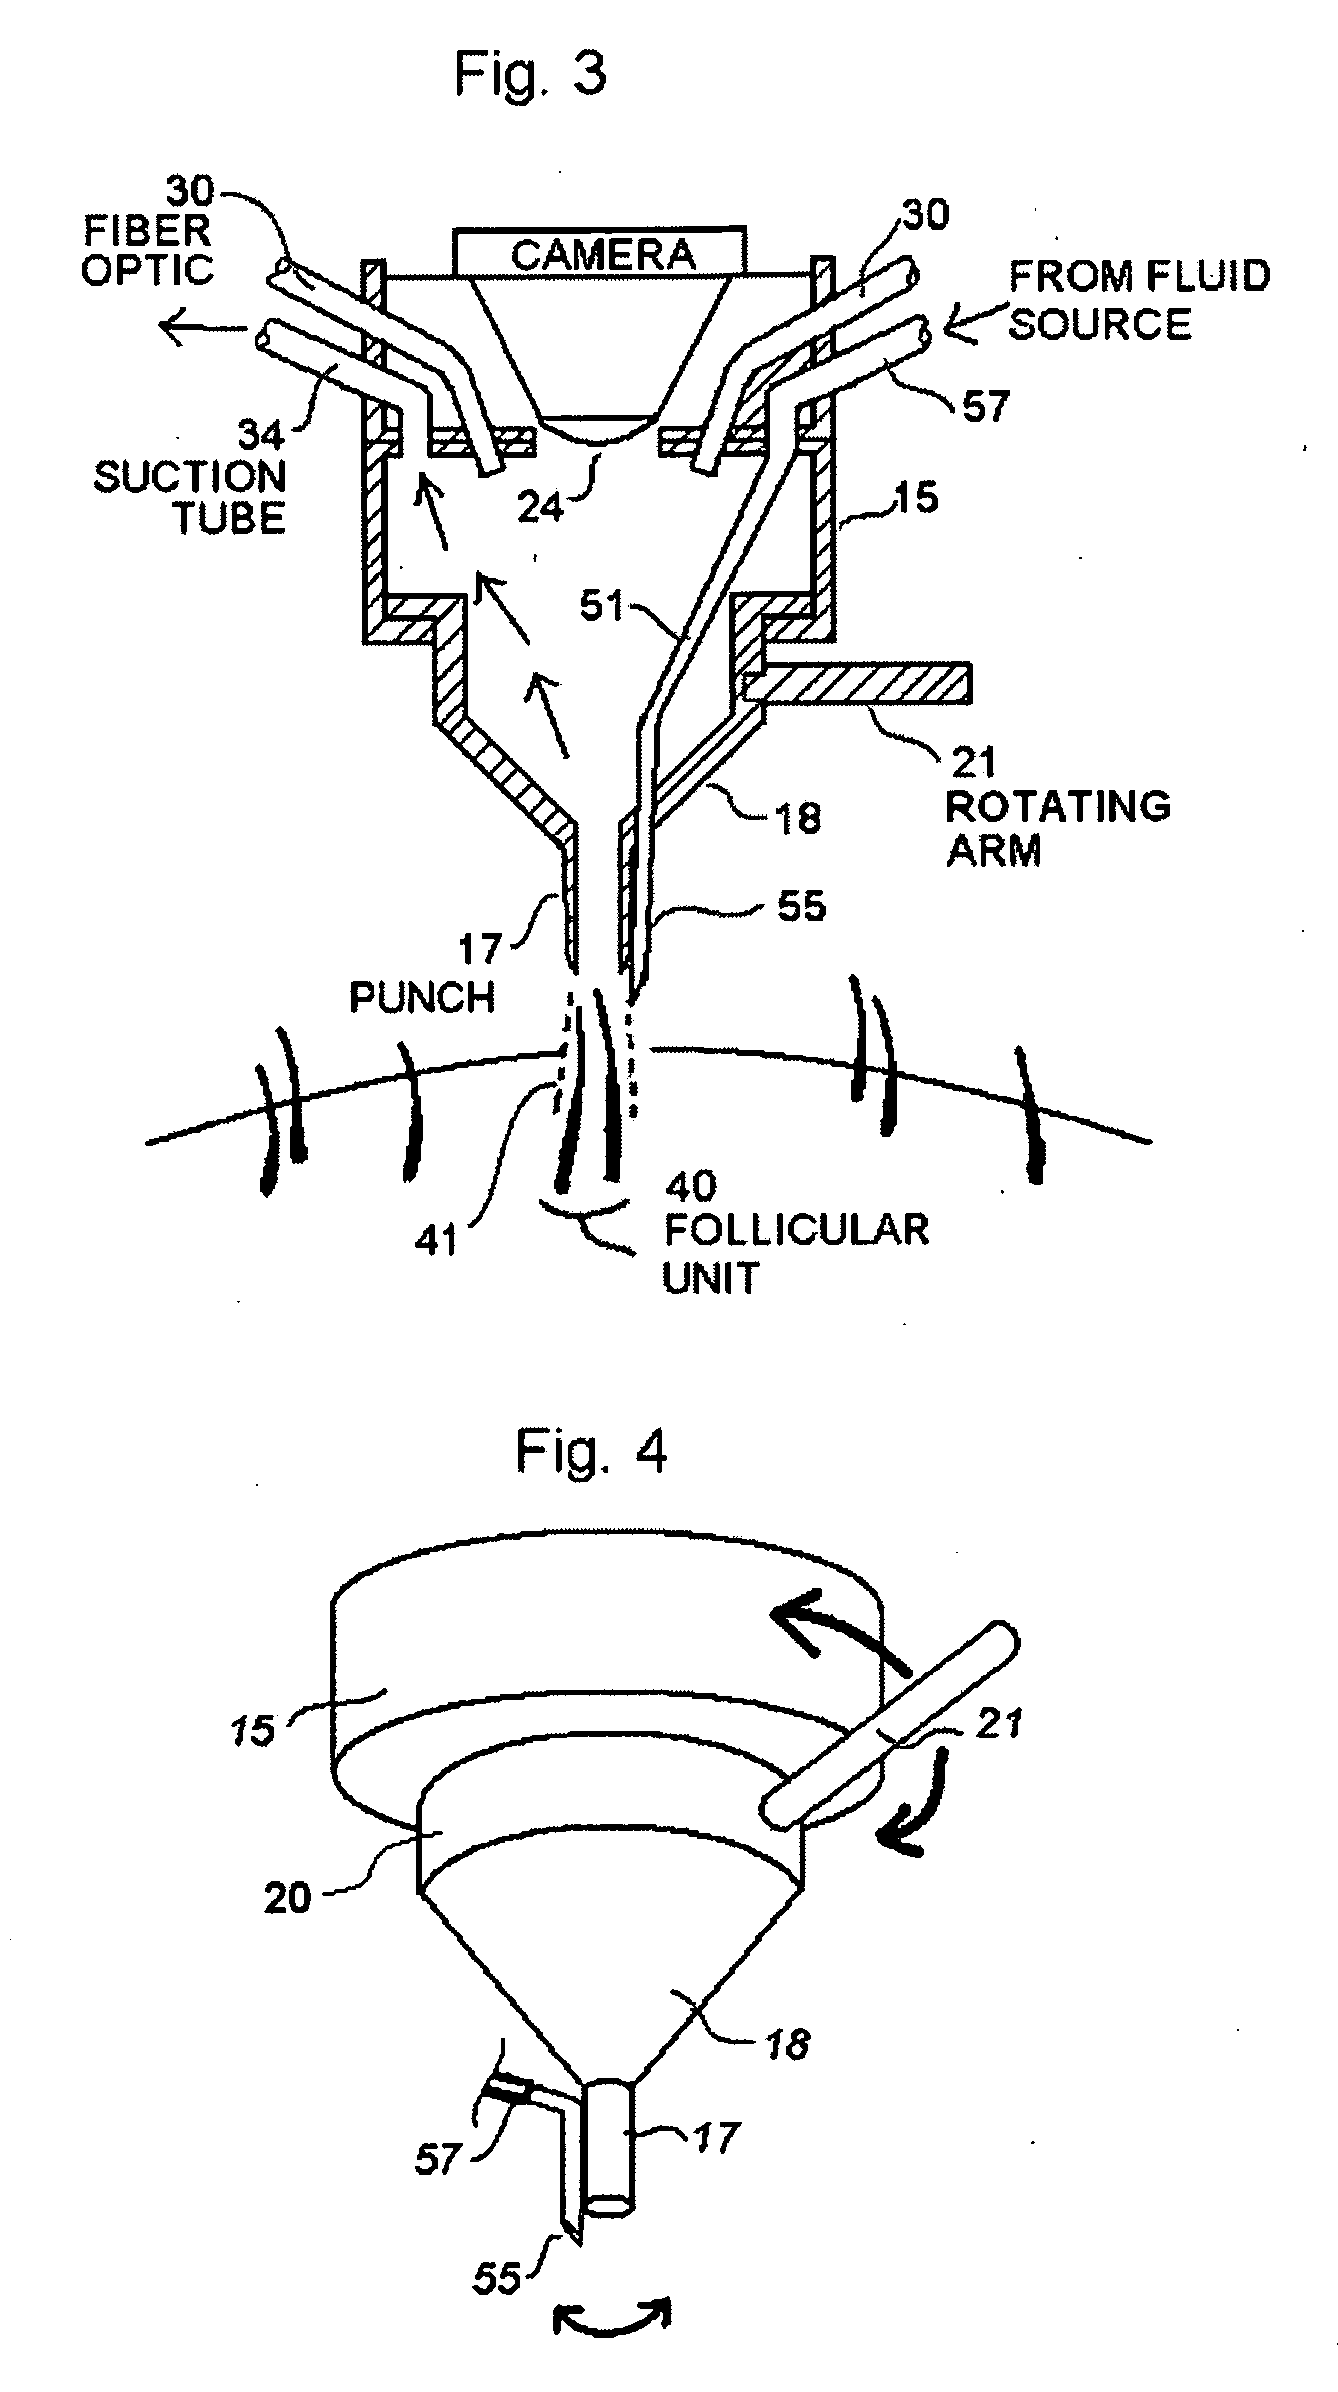 Hair harvesting device and method with localized subsurface dermal fluid insertion